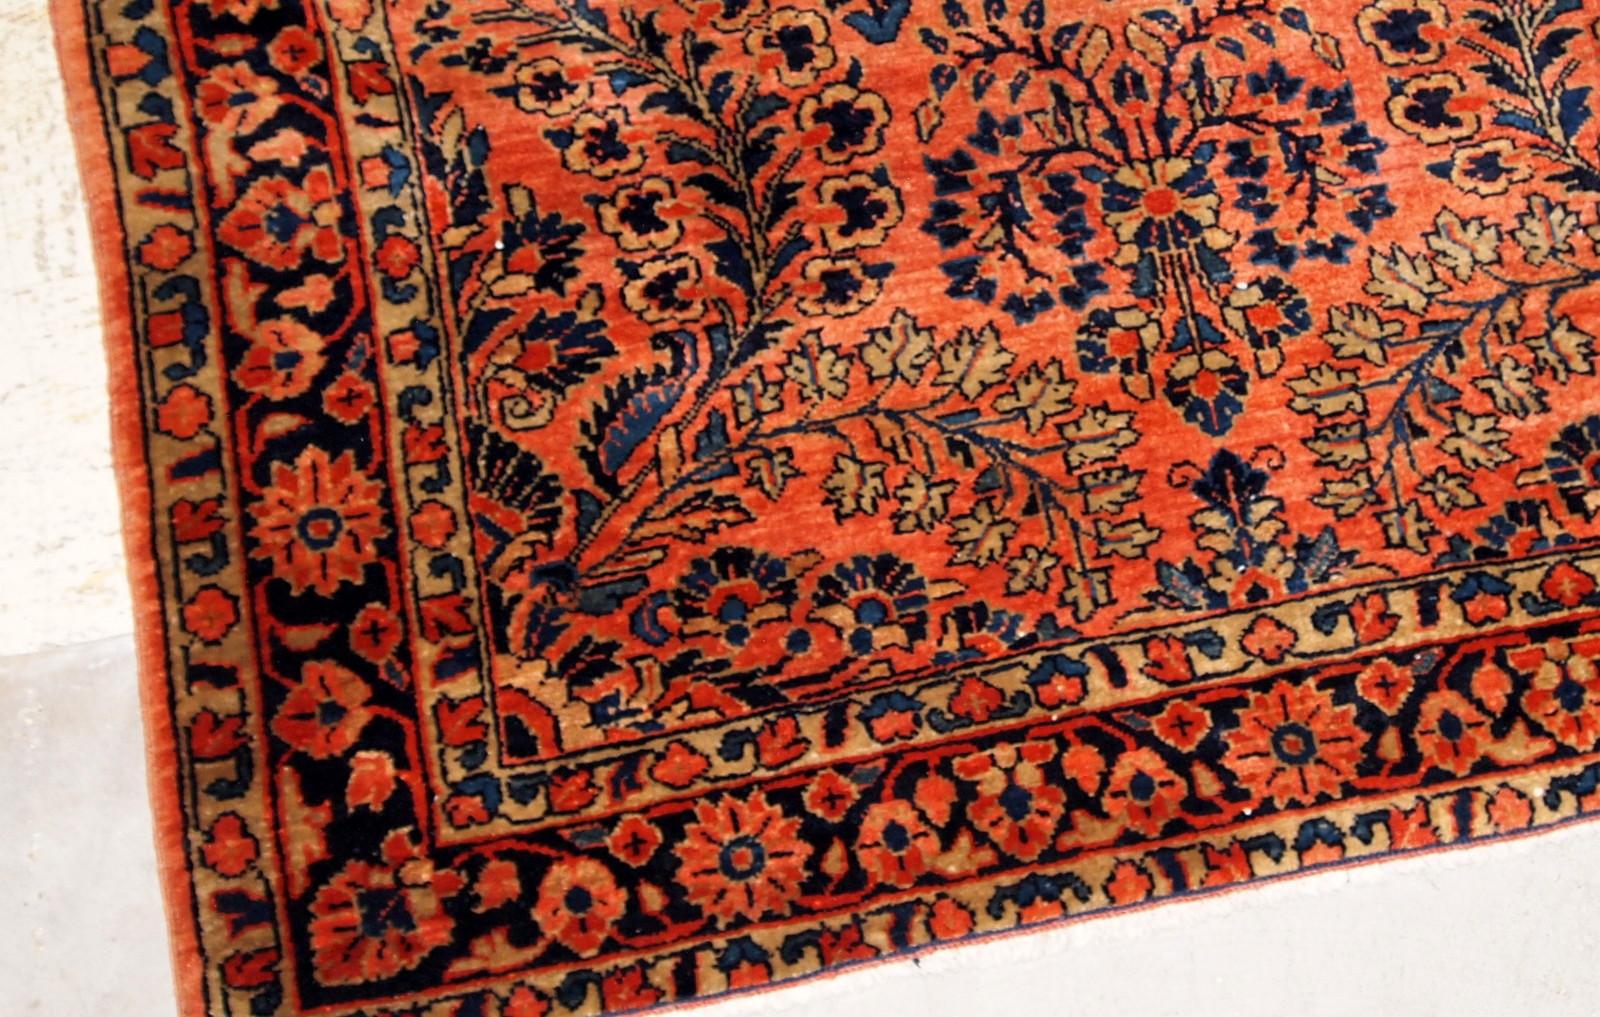 Antique Sarouk rug in red shade with classic floral design. The rug is from the beginning of 20th century in original good condition.

- Condition: original good,

- circa: 1920s,

- Size: 3.2' x 5.3' ( 97cm x 161cm ),

- Material: